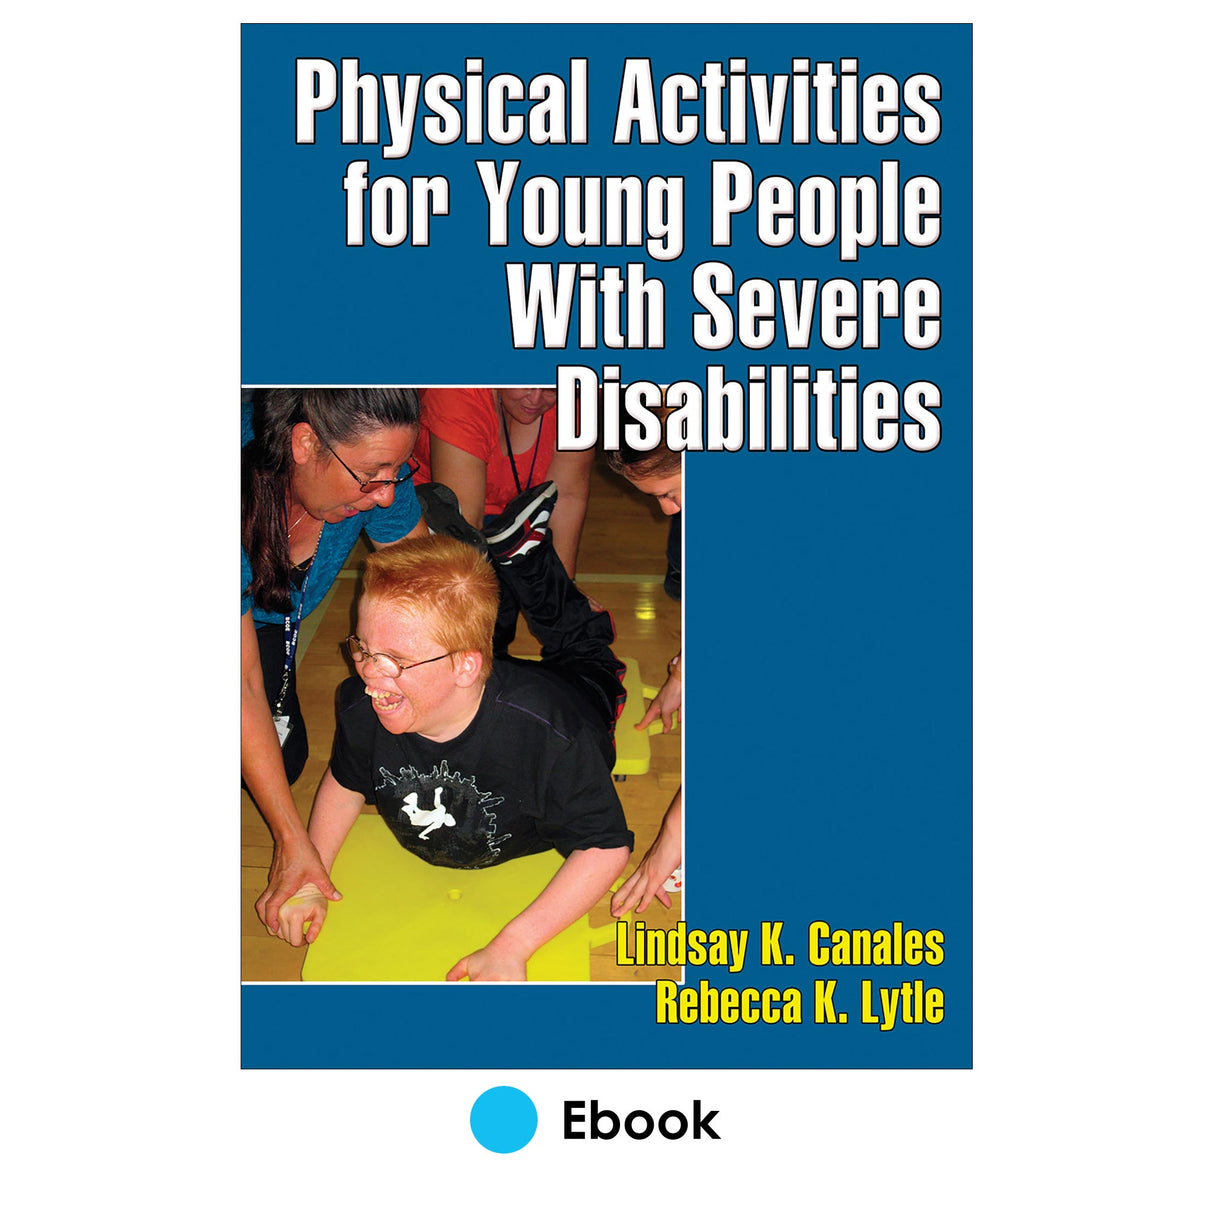 Physical Activities for Young People With Severe Disabilities PDF